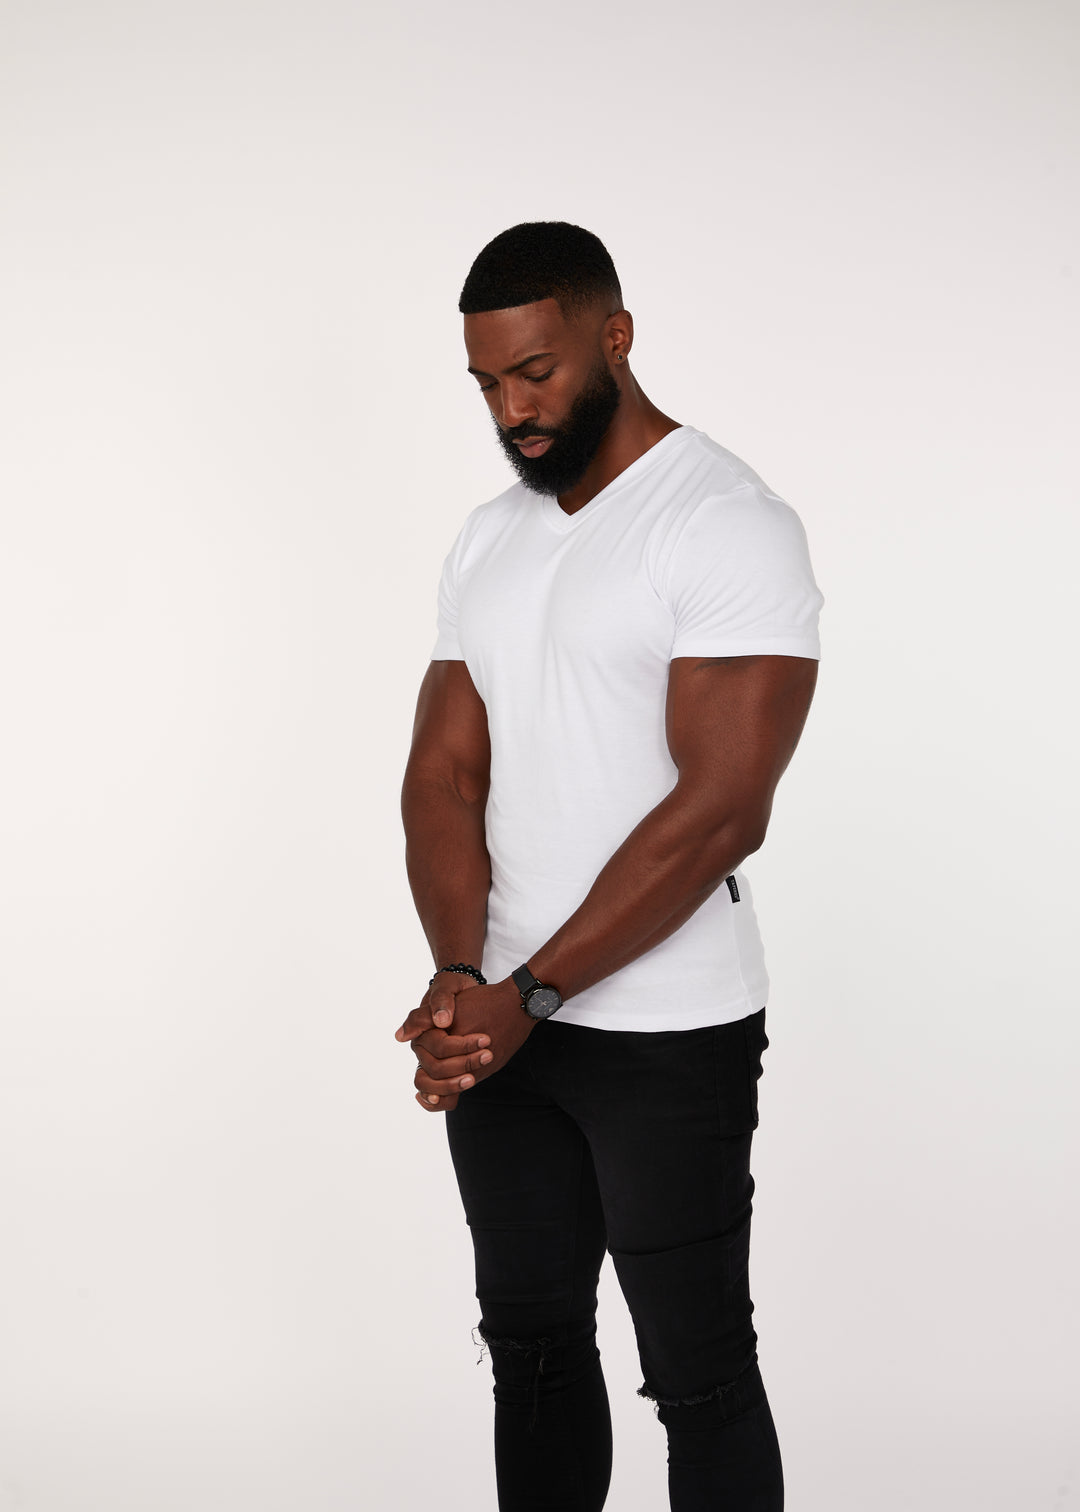 Muscle Fit Fit V-Neck T-Shirt in White. A Proportionally Fitted and Muscle Fit V Neck. The best v neck t-shirt for bodybuilders